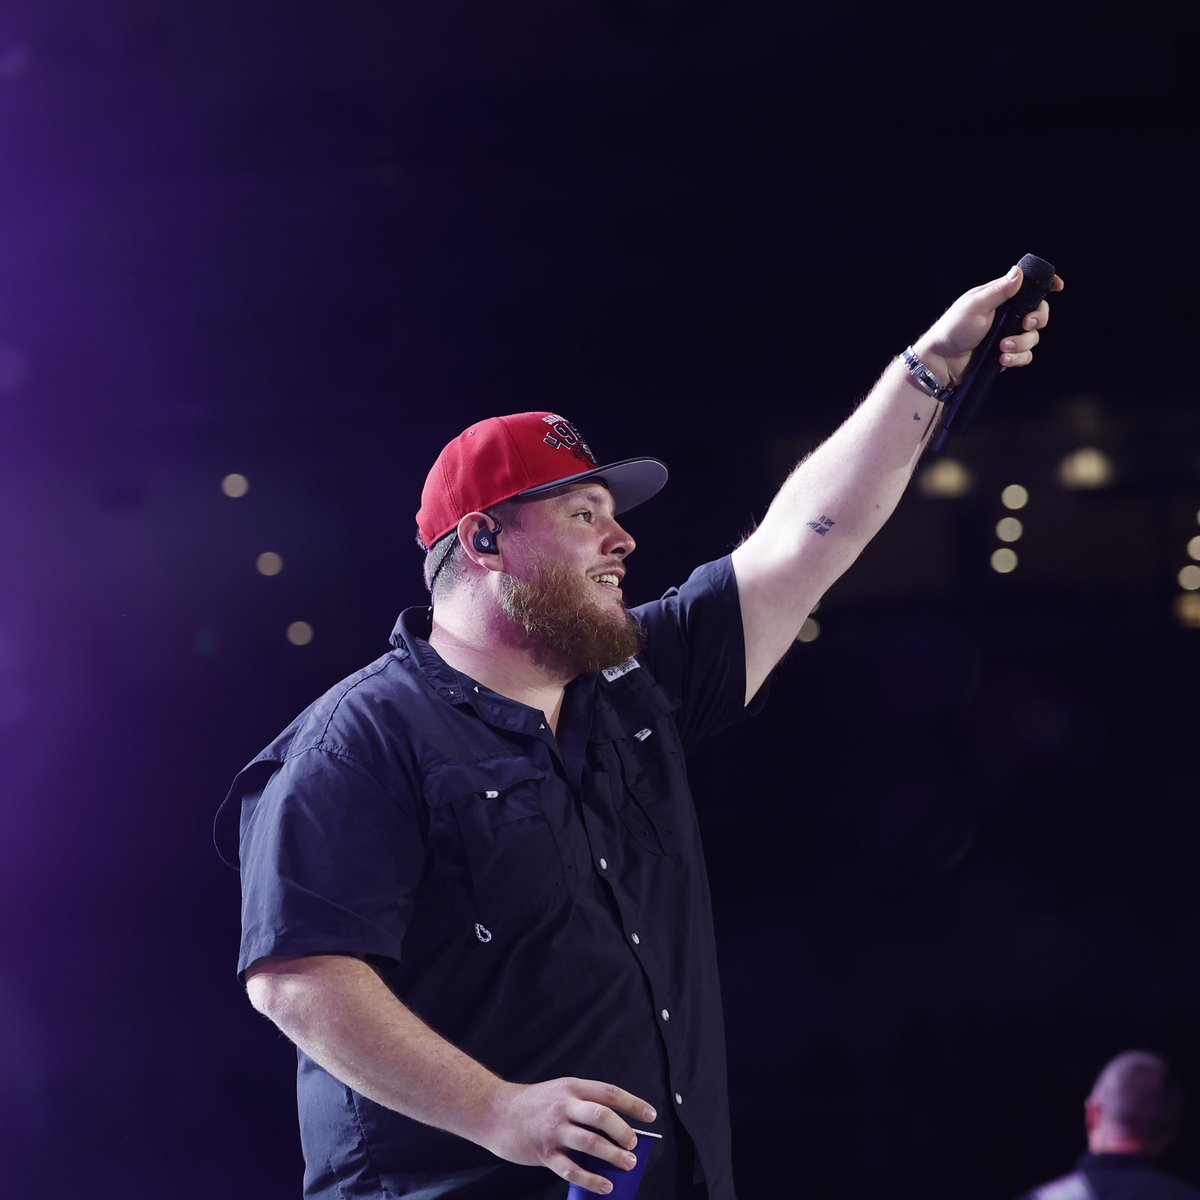 Great to have you in the Bay, @lukecombs! Night two at @LevisStadium 🔜